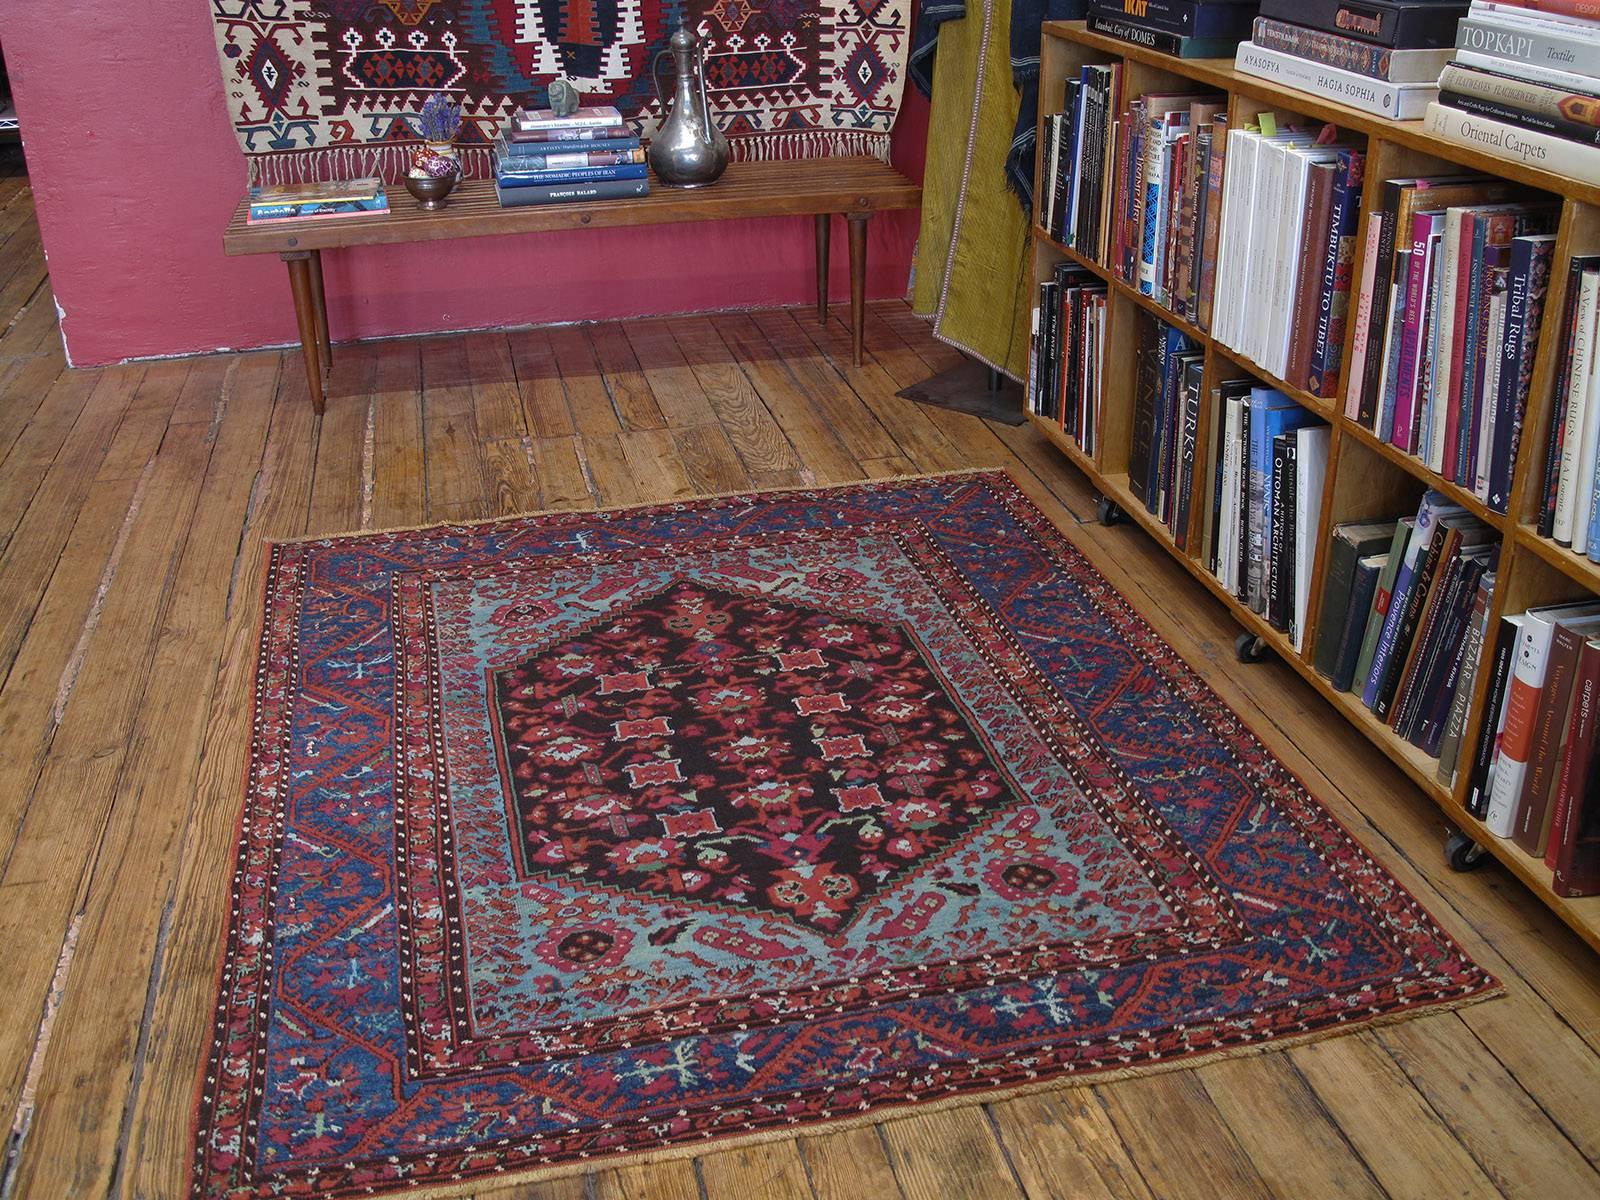 With its distinct border featuring tulips and carnations and other stylized floral forms everywhere, this antique rug from Kula, a venerable weaving center in Western Turkey for centuries, is a direct descendant of Ottoman Turkish weavings from the